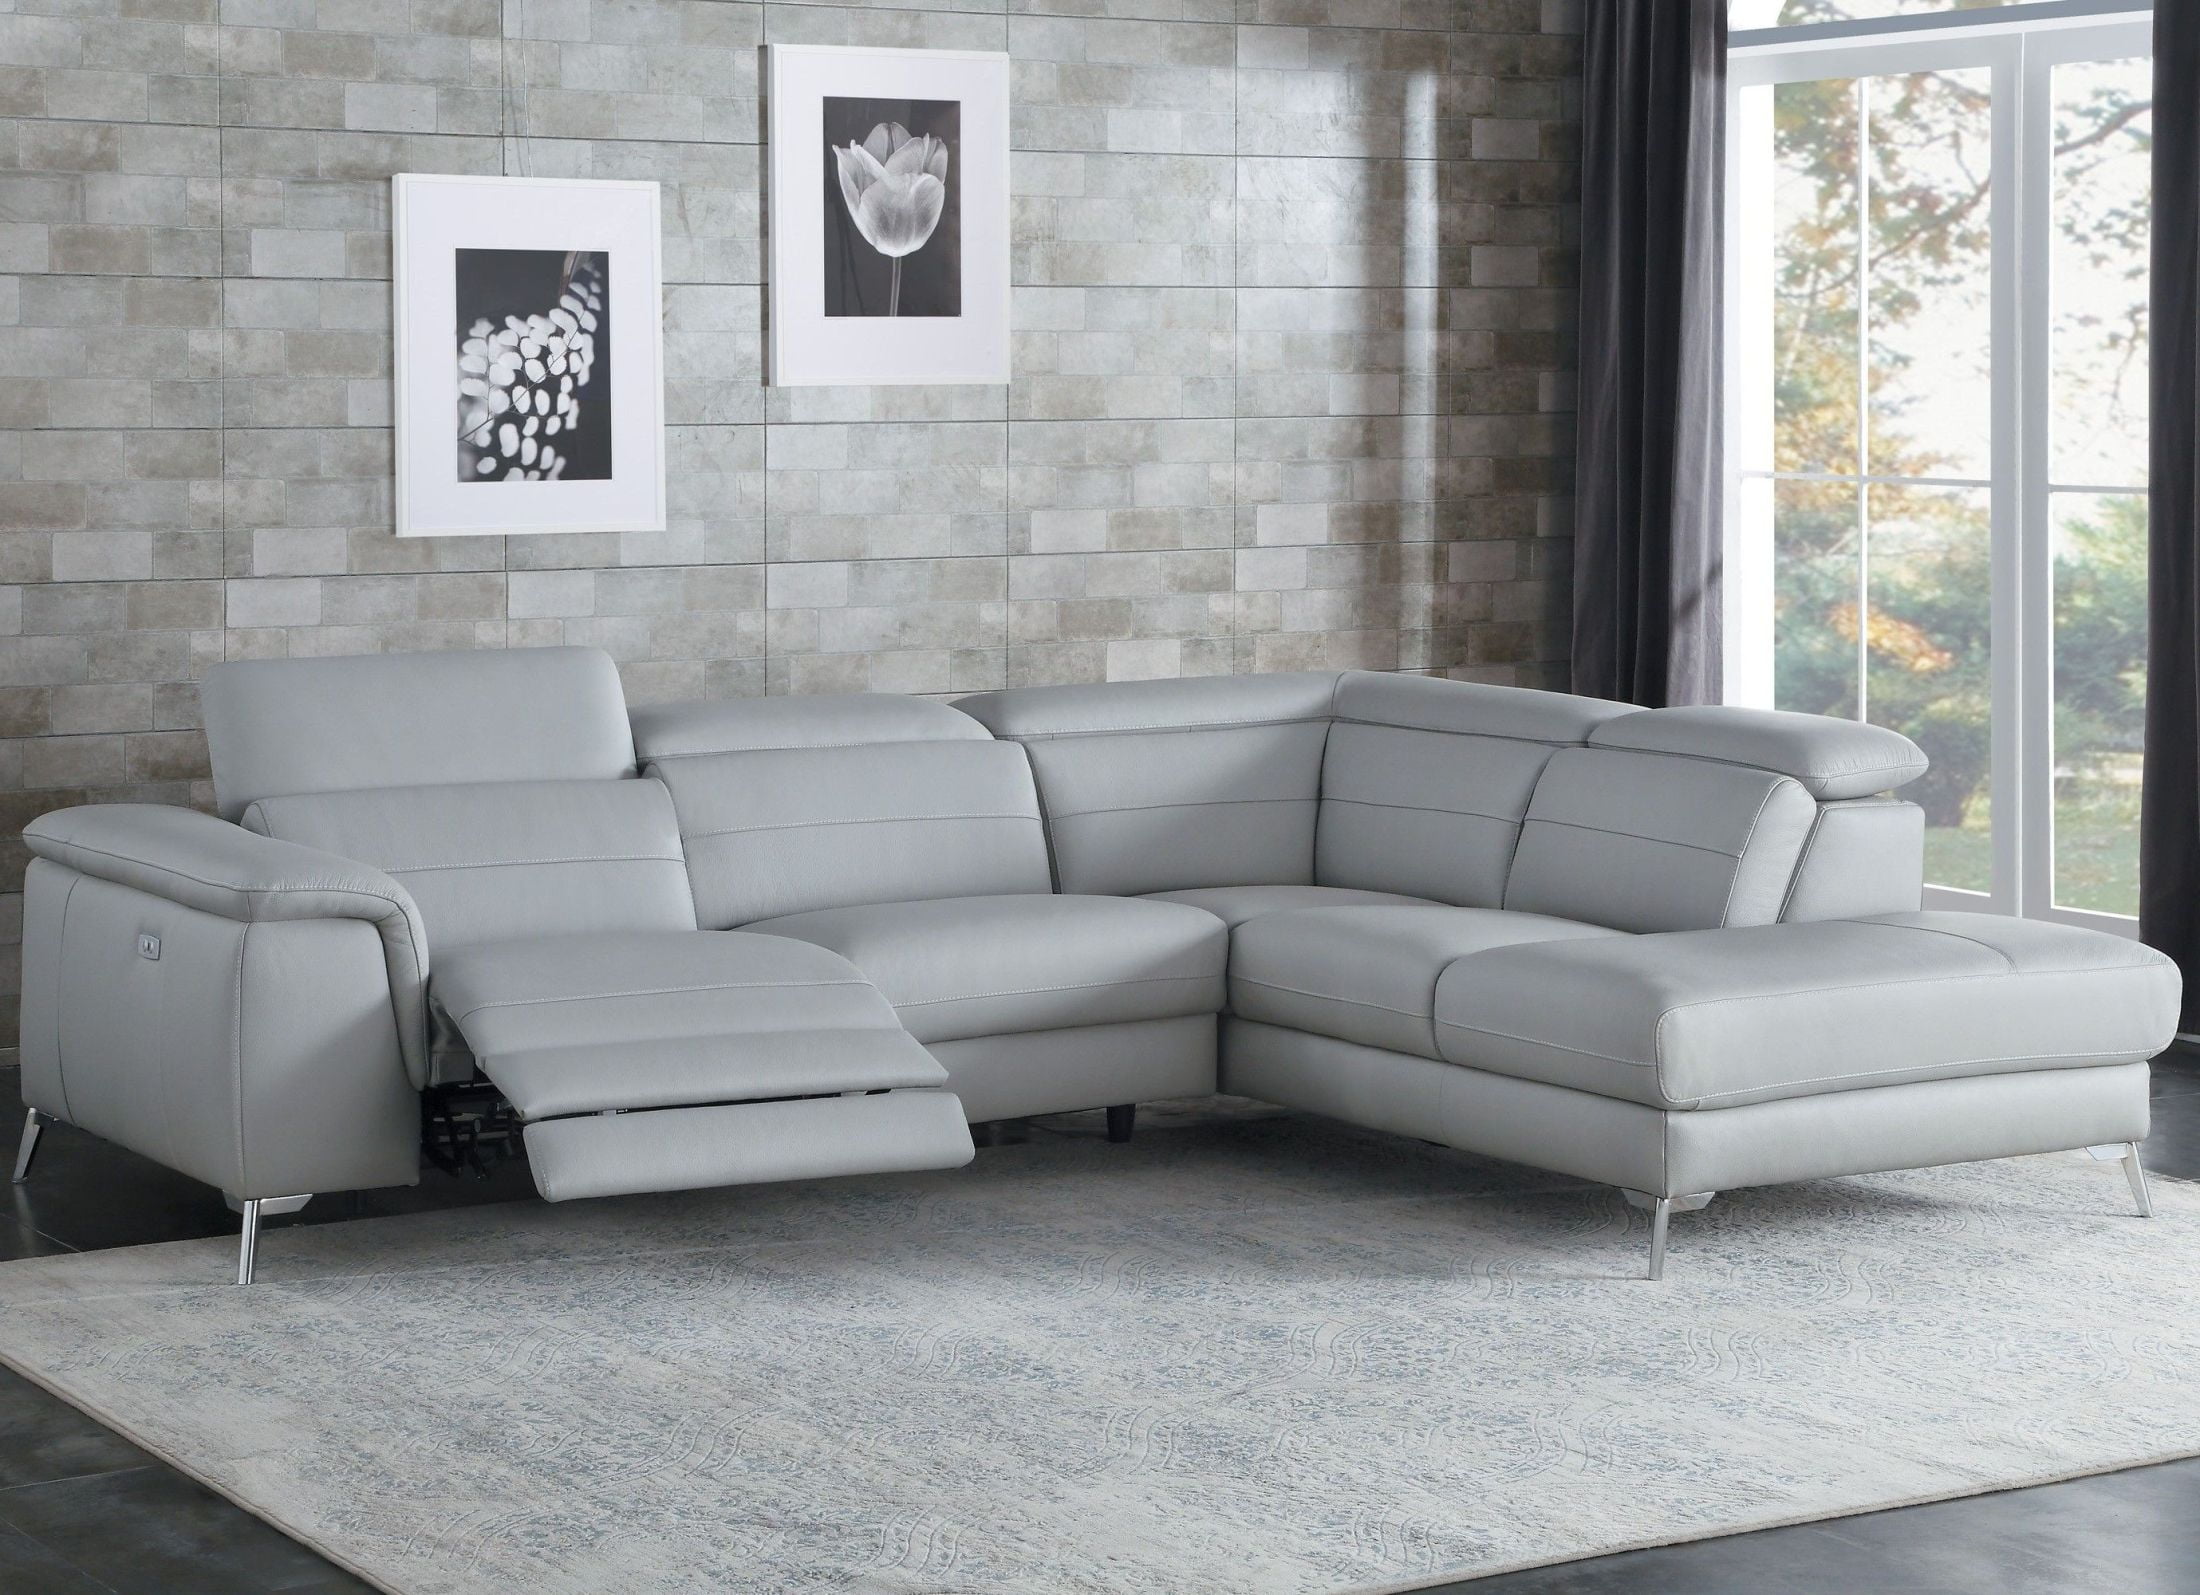 grey leather sectional sofa with recliners